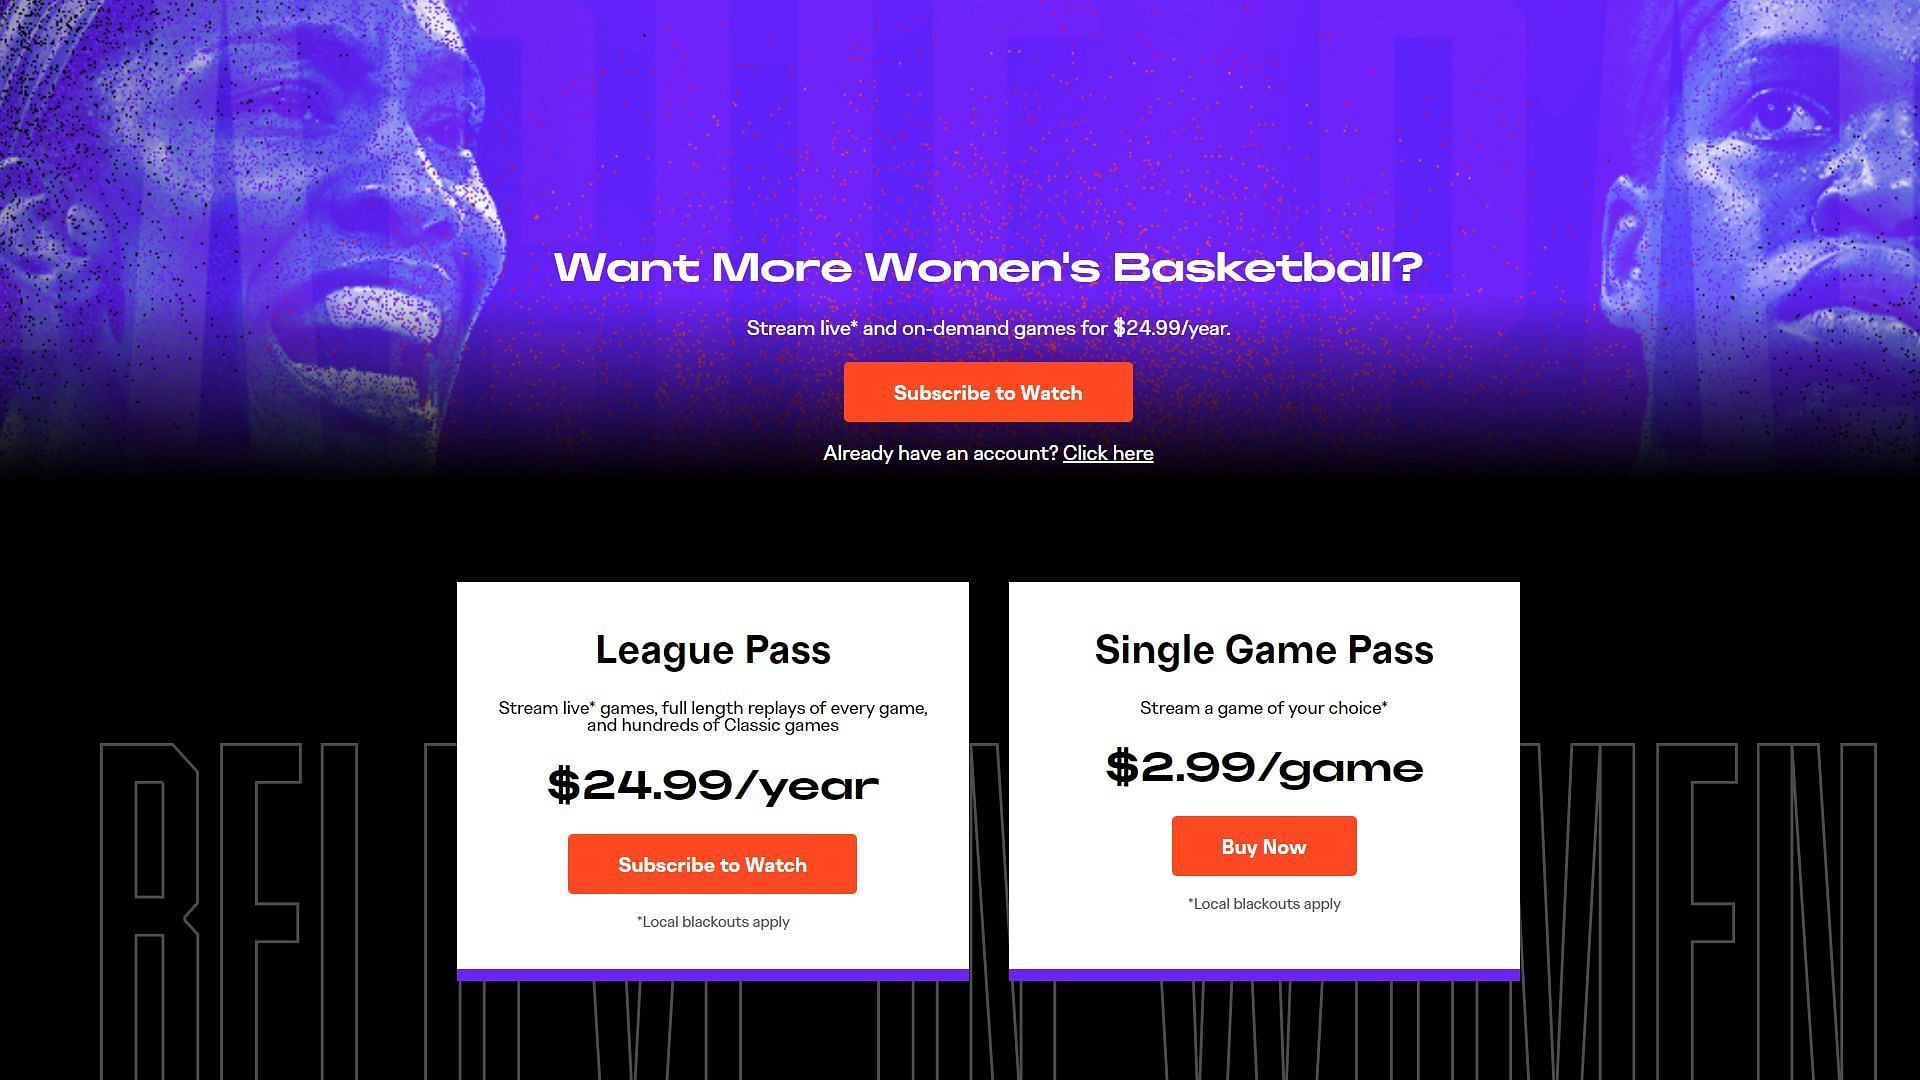 WNBA League Pass costs only $24.99 per year, which is very cheap